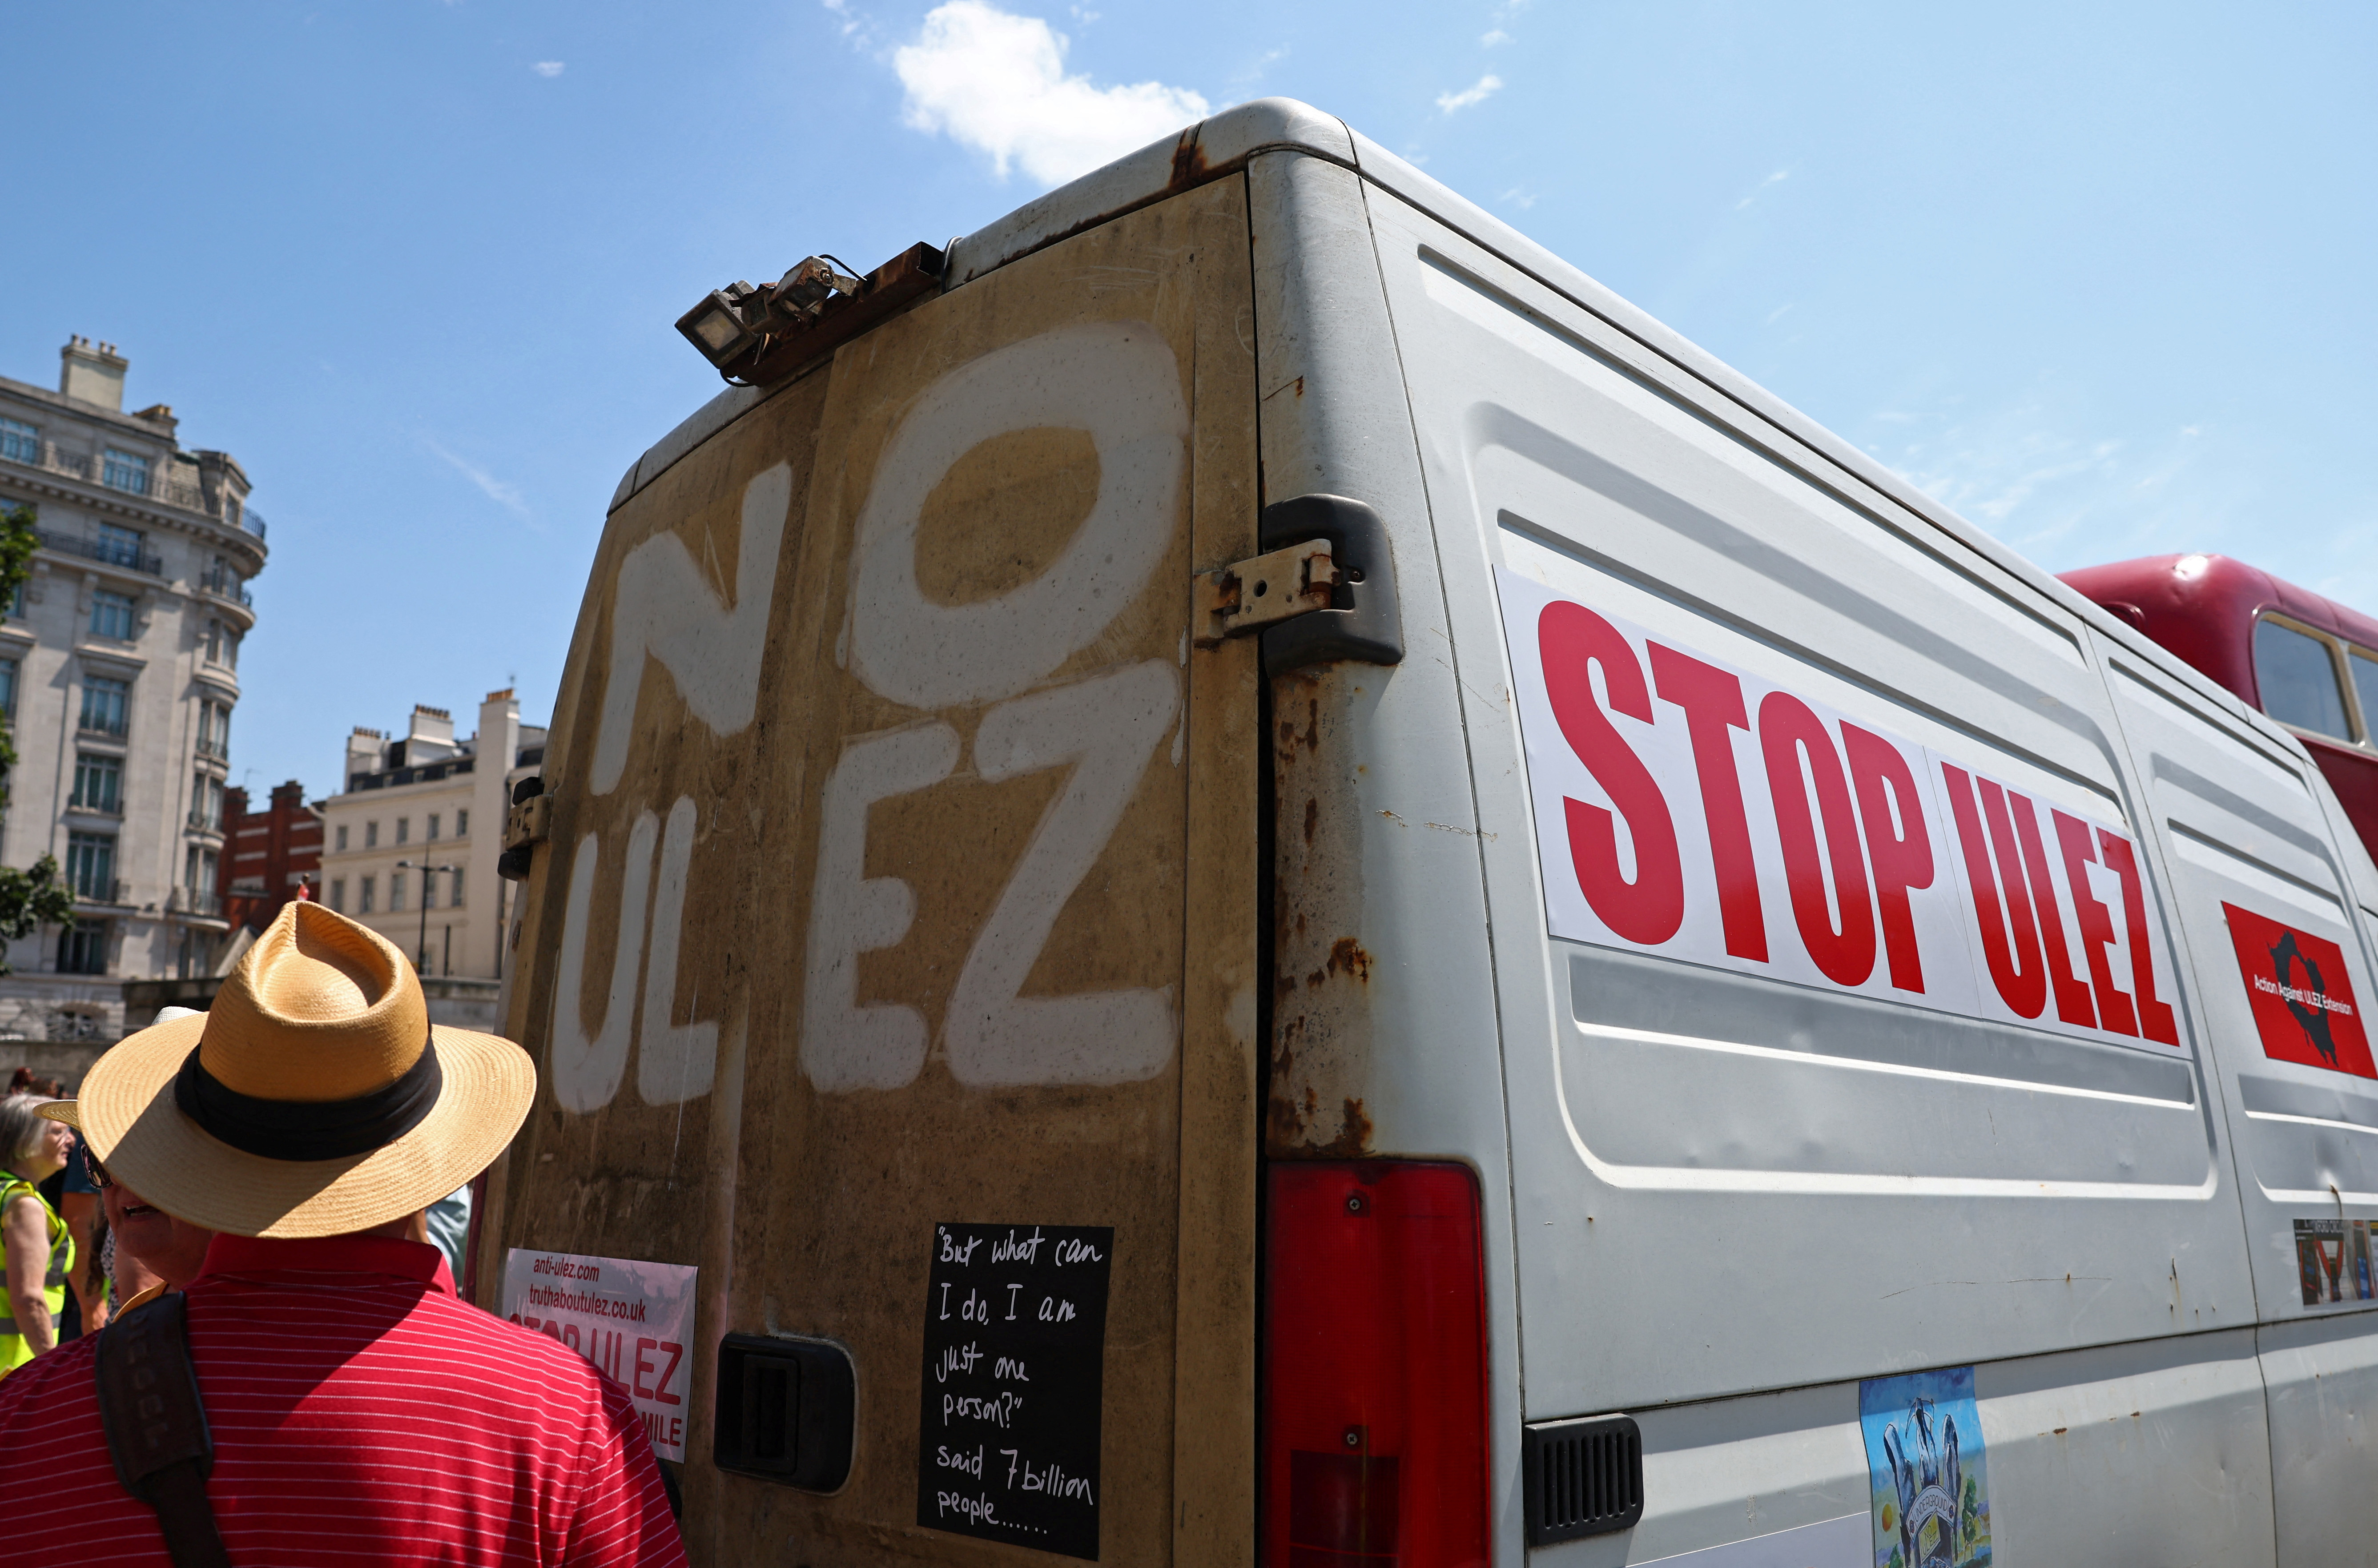 Protest against proposed upcoming expansion of ULEZ tariff on vehicle emissions in London